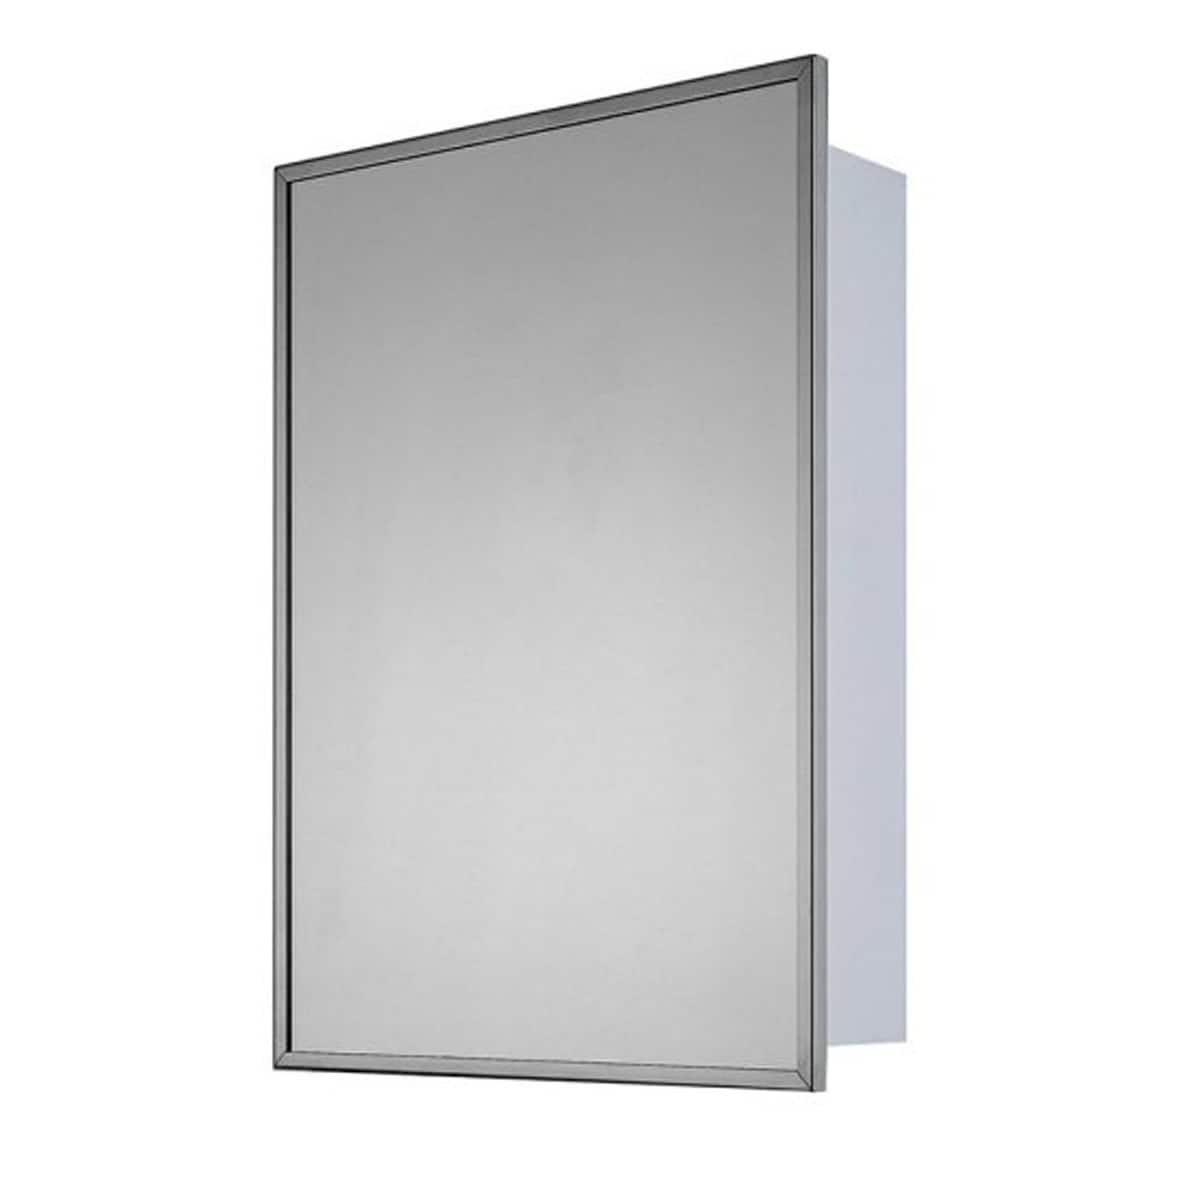 Shop Ketcham Cabinets Recessed Mounted Stainless Steel Single Door